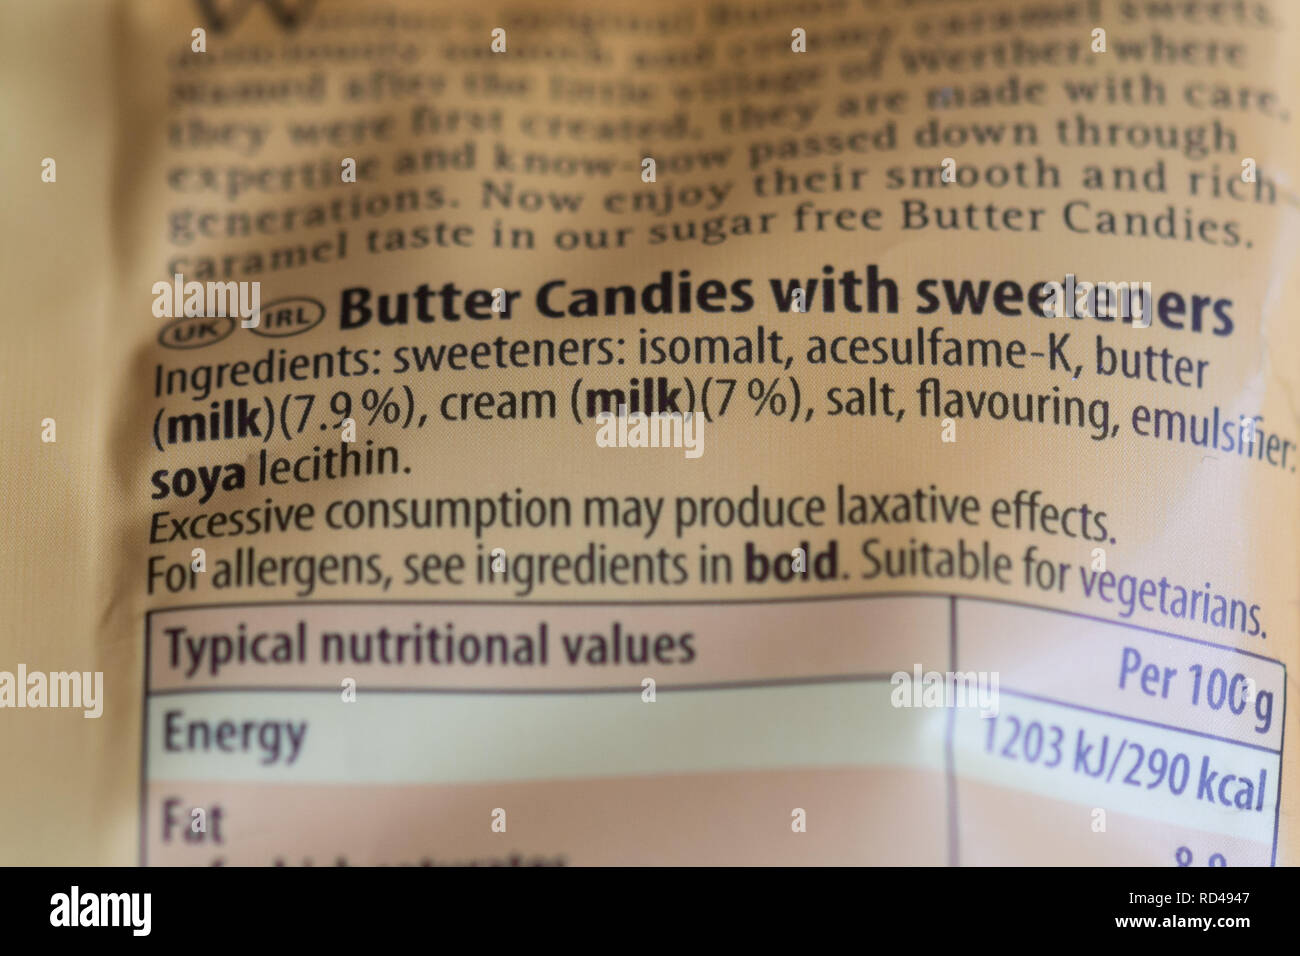 Sweeteners isomalt and acesulfame-K shown in ingredients list on packet of Werthers sugar free butter candies sweets Stock Photo